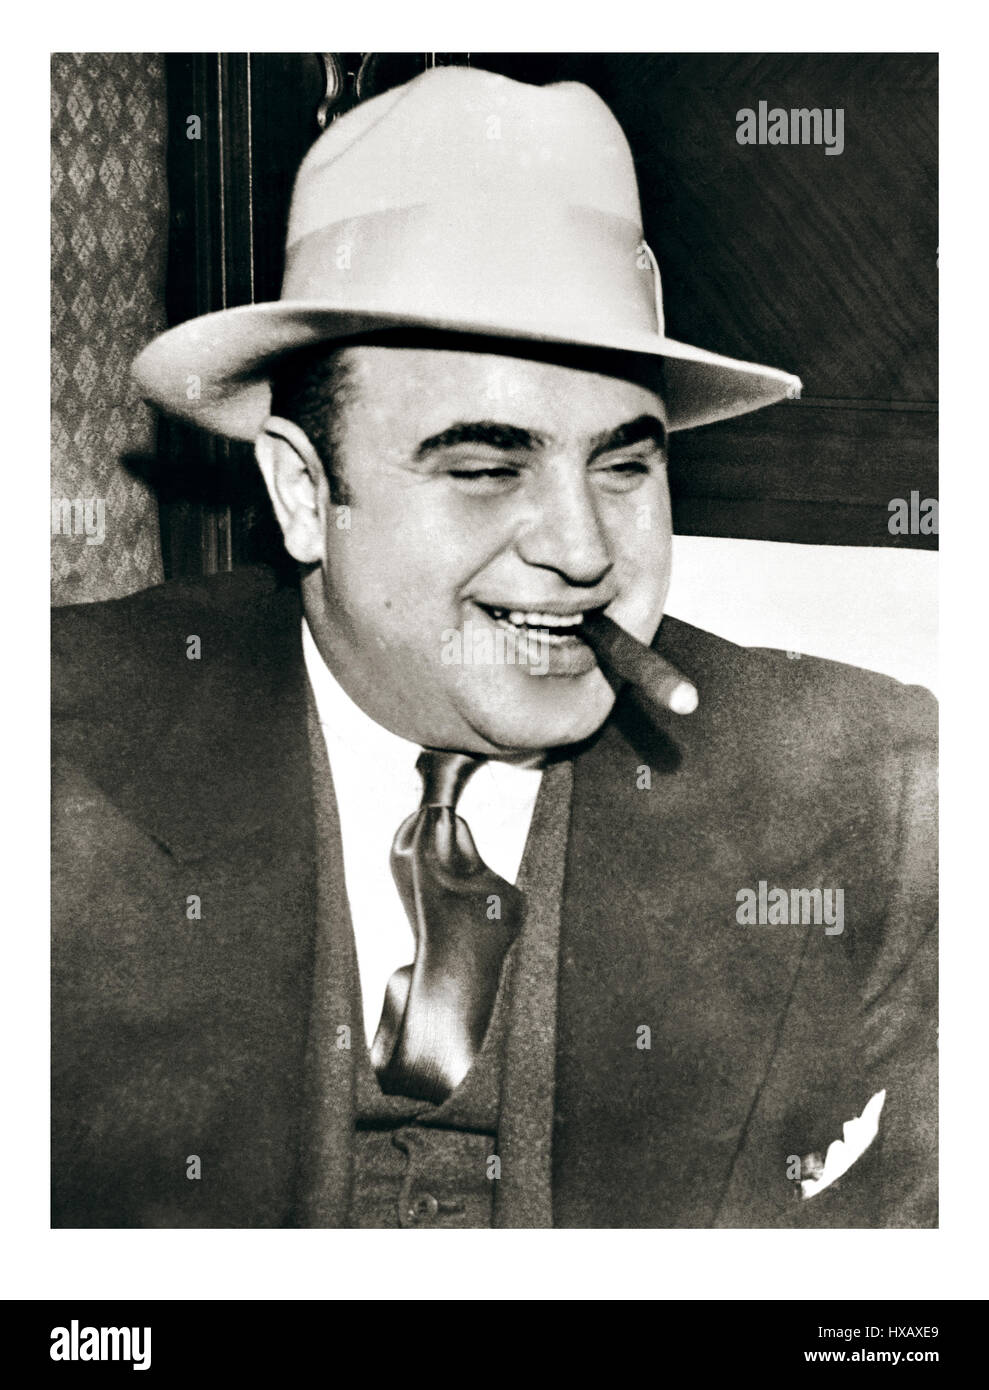 AL CAPONE CIGAR HAT 1920's Vintage B&W image of Al Capone, probably the most famous organized crime lord, or more commonly known as a Mafia mob gangster, in 1920's American history. Al Capone, byname of Alphonse Capone, also called Scarface, (born January 17, 1899, Brooklyn, New York, U.S.—died January 25, 1947, Palm Island, Florida), the most famous American gangster, who dominated organized crime in Chicago from 1925 to 1931. Stock Photo